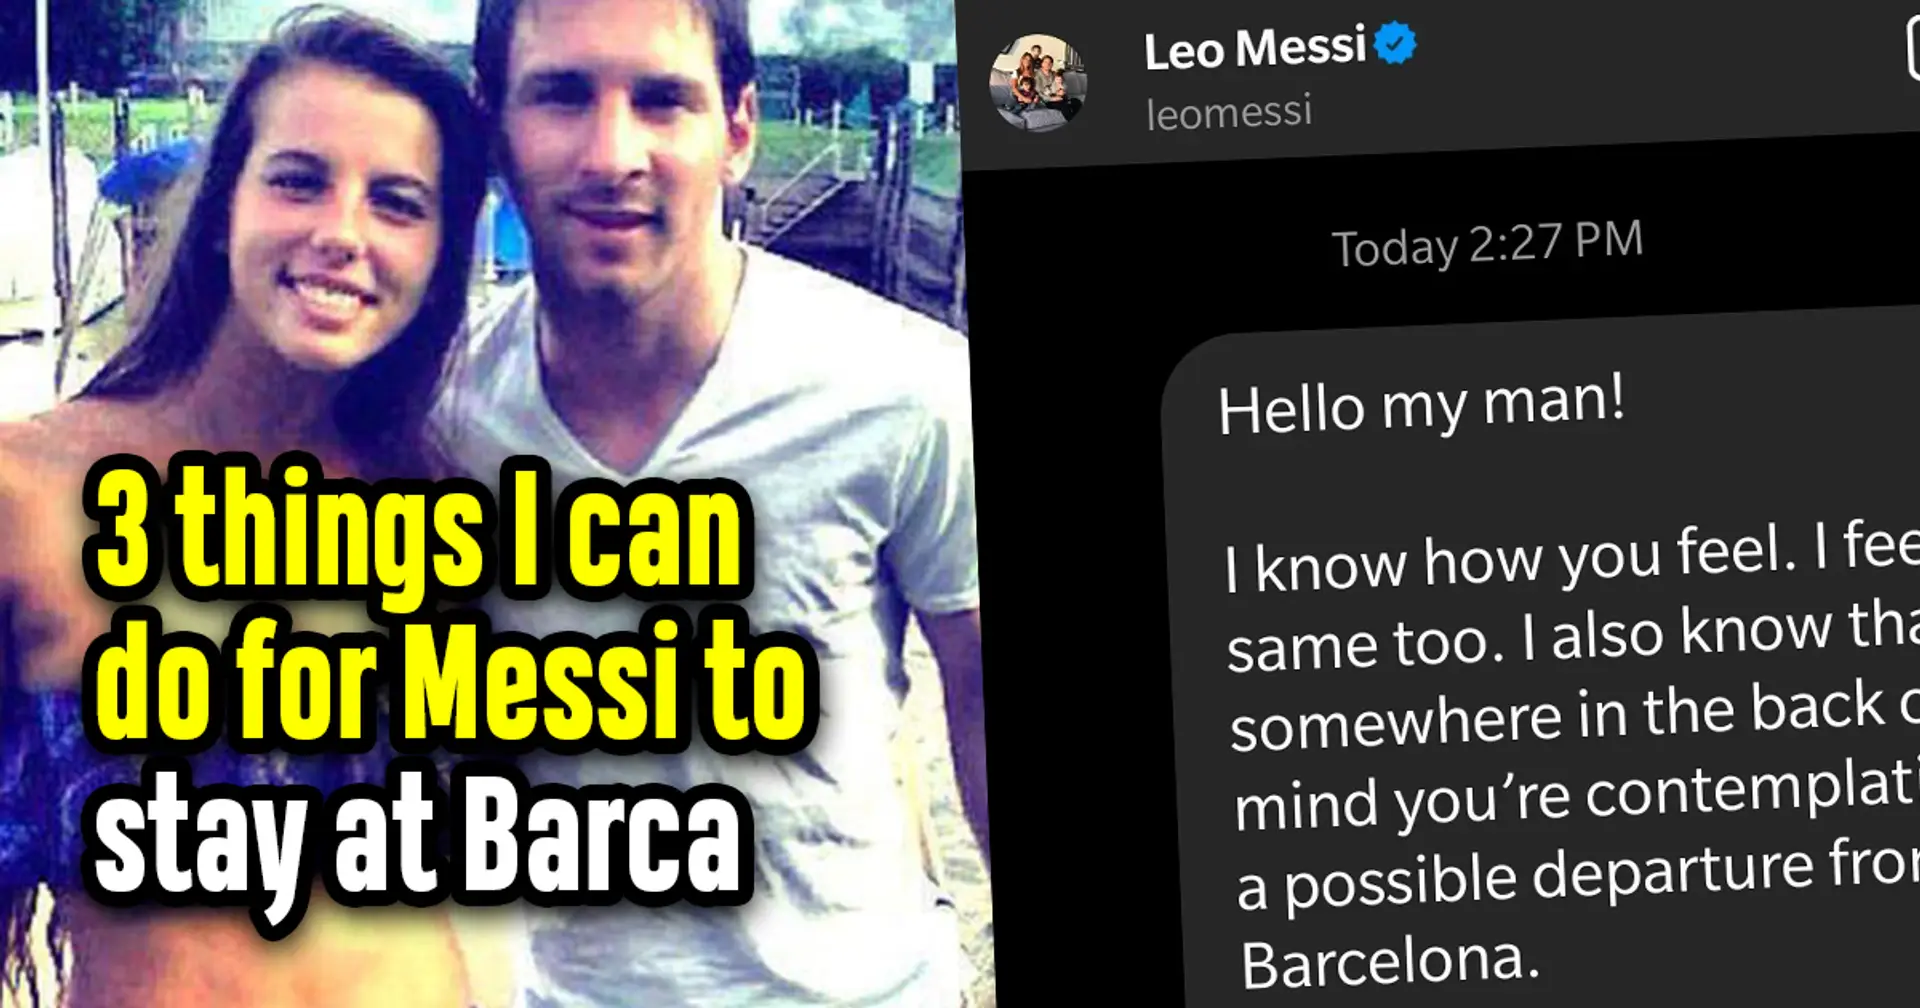 ‘Baby, don’t leave!’: I messaged Leo Messi begging him to stay at Barcelona